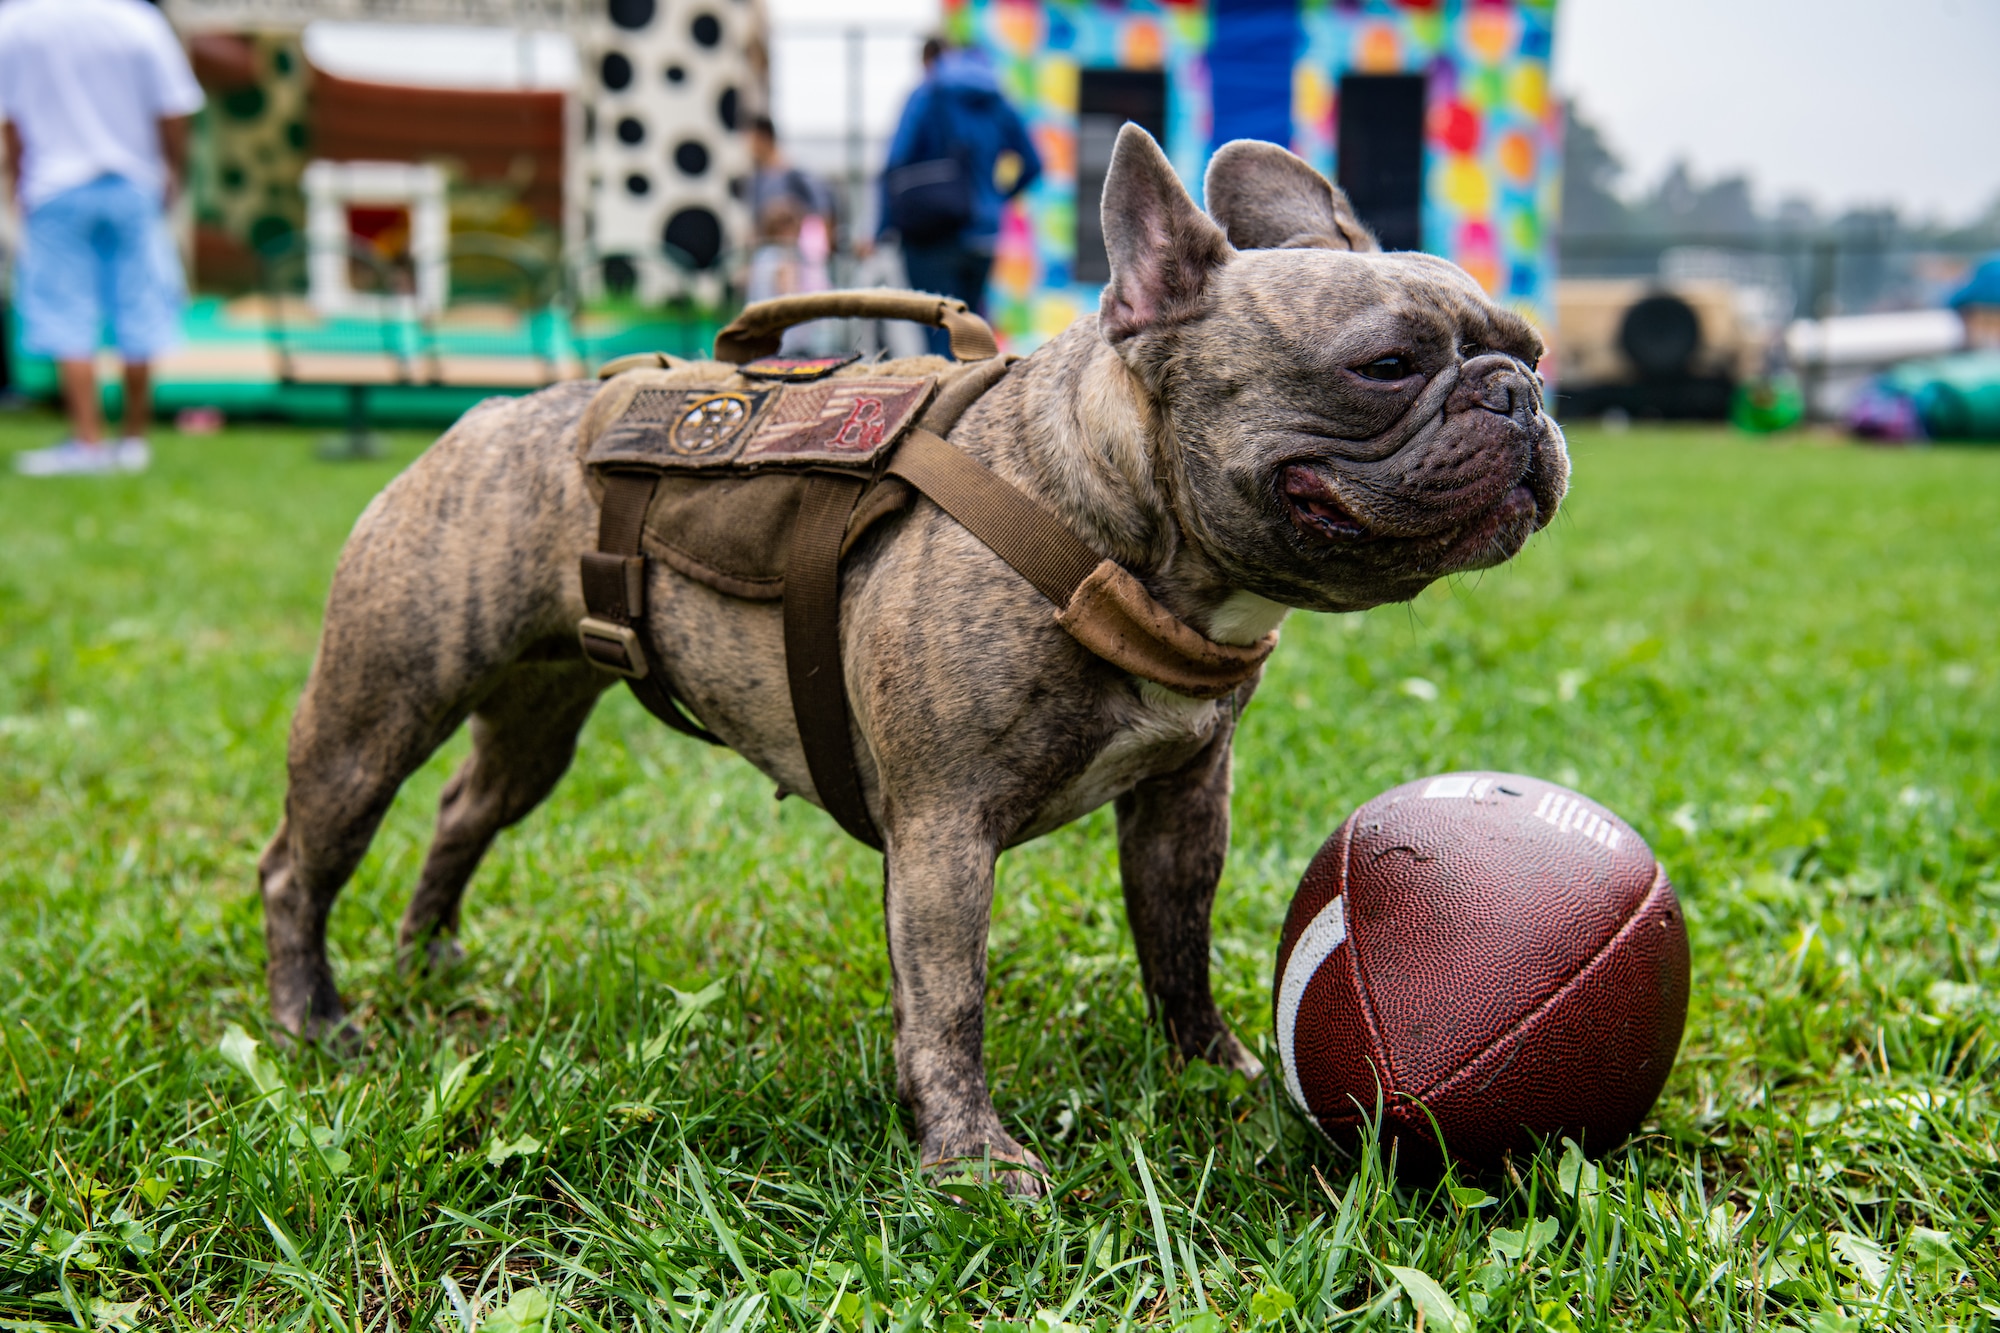 Lucy, the pet of U.S. Air Force Tech. Sgt. Derek Botelho, 435th Contingency Response Support Squadron contracting officer, plays with a football during a 435th Air Ground Operations Wing Family Fun Event at Ramstein Air Base, Germany, Aug. 18, 2022. Approximately 800 AGOW personnel and their families, pets included, came together to enjoy food and fellowship. (U.S. Air Force photo by Airman 1st Class Jared Lovett)